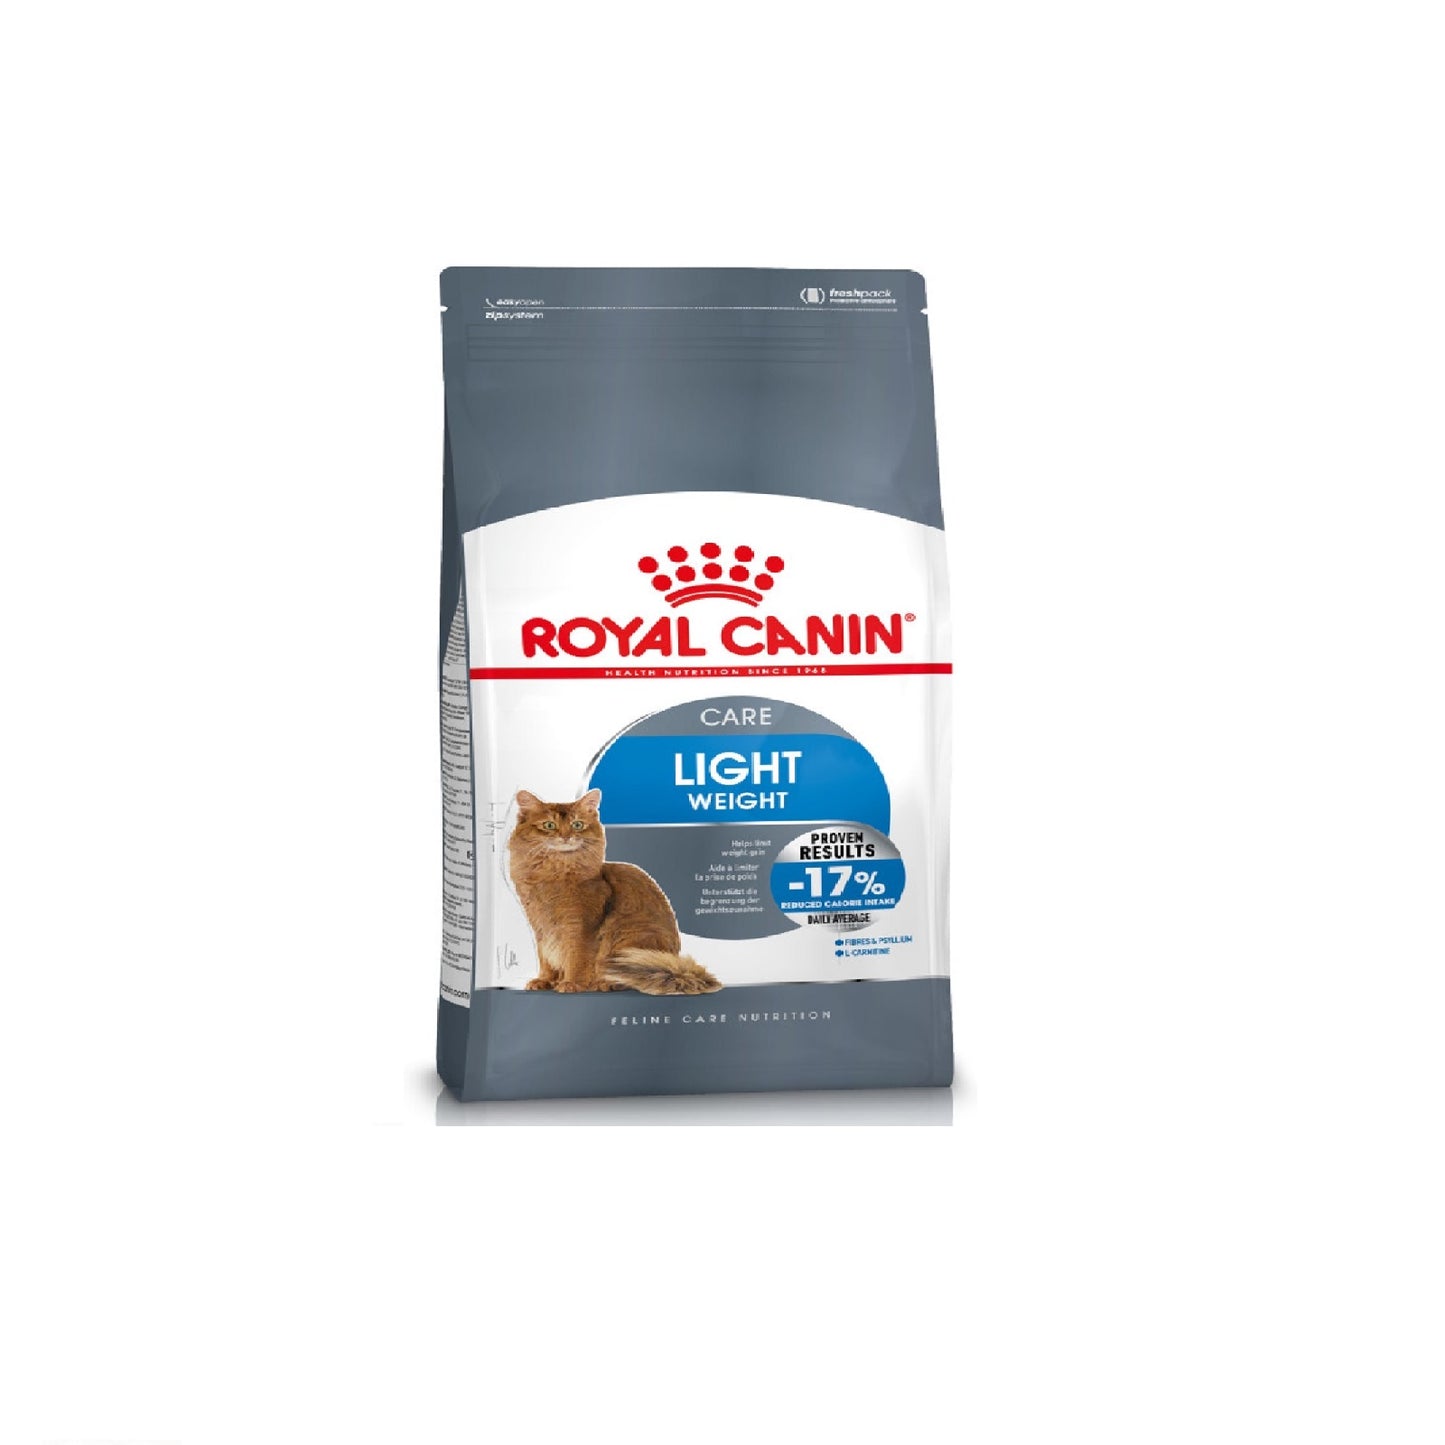 ROYAL CANIN - Light Weight Care